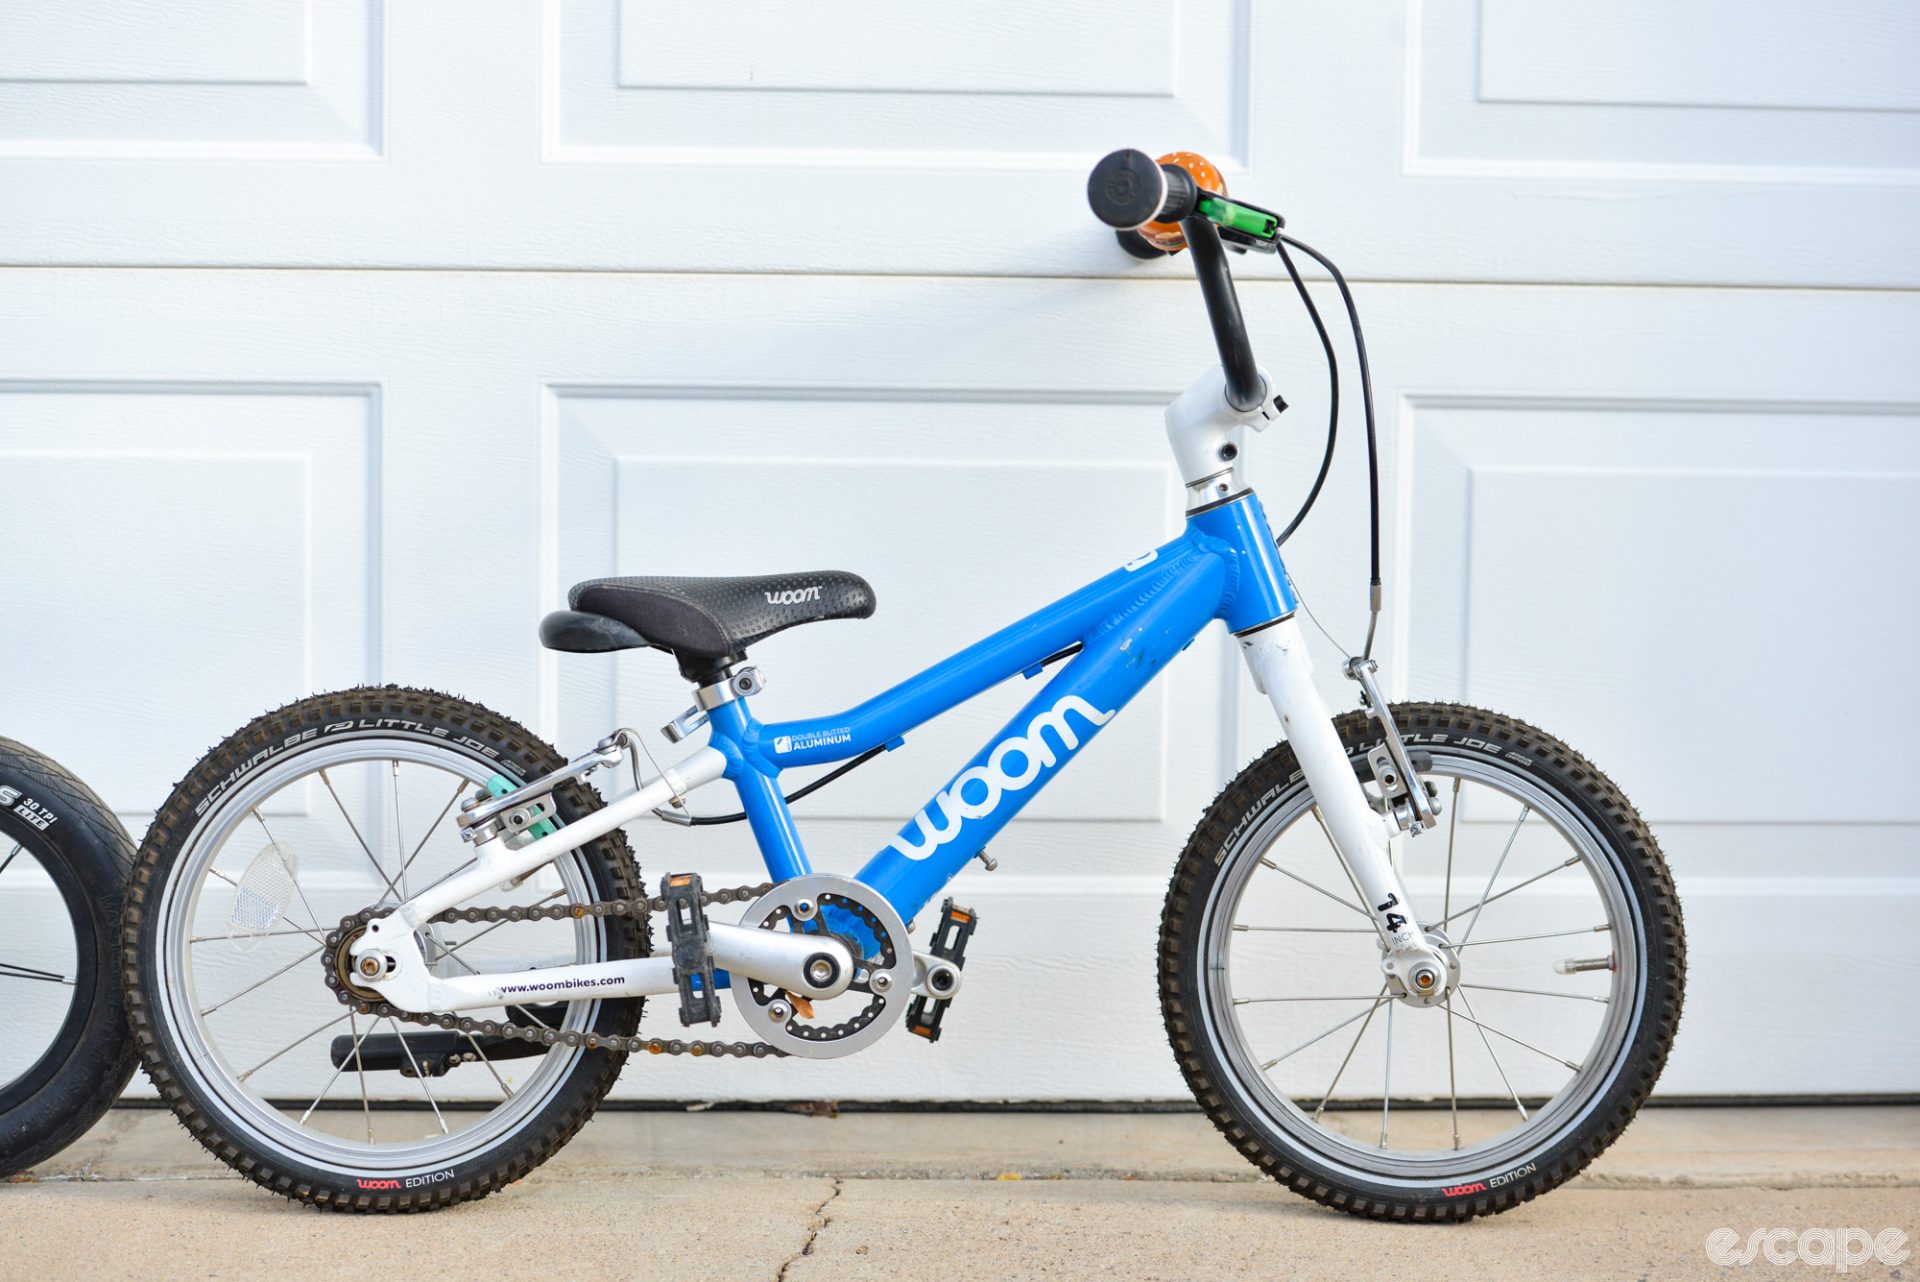 The Woom 2, with a lightweight but sturdy aluminum frame, hub-spoke-and-rim wheels with aired tires, and front and rear hand brakes. The handlebars are set tall for an upright position.